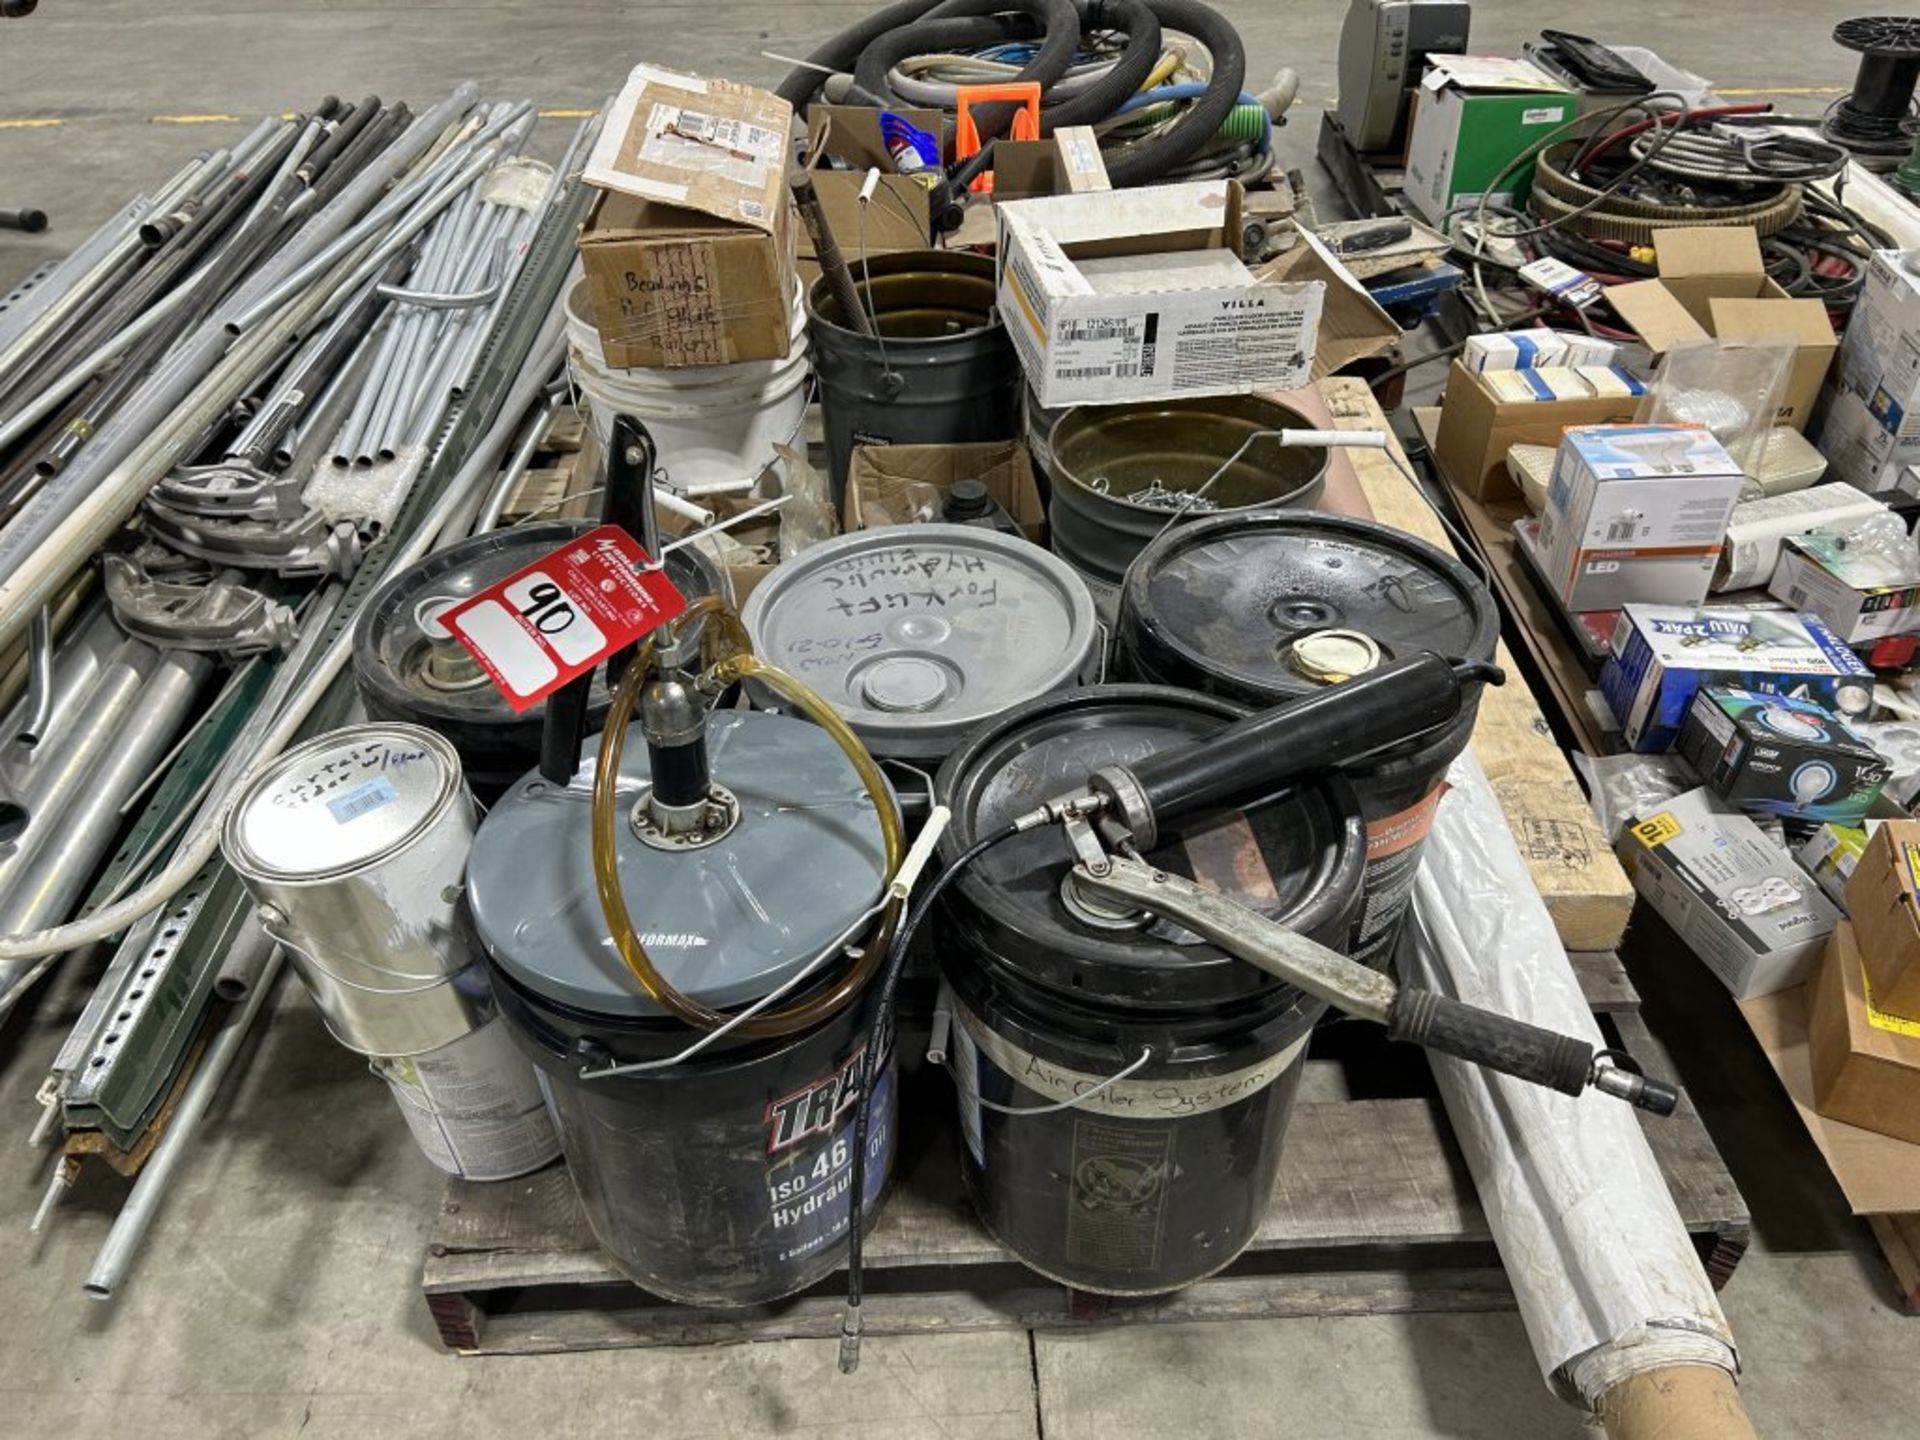 PALLET FULL OF (5) 5-GALLON BUCKETS OF HYDRAULIC OIL, BUCKET WITH CHAIN, LARGE BOLTS, ETC.